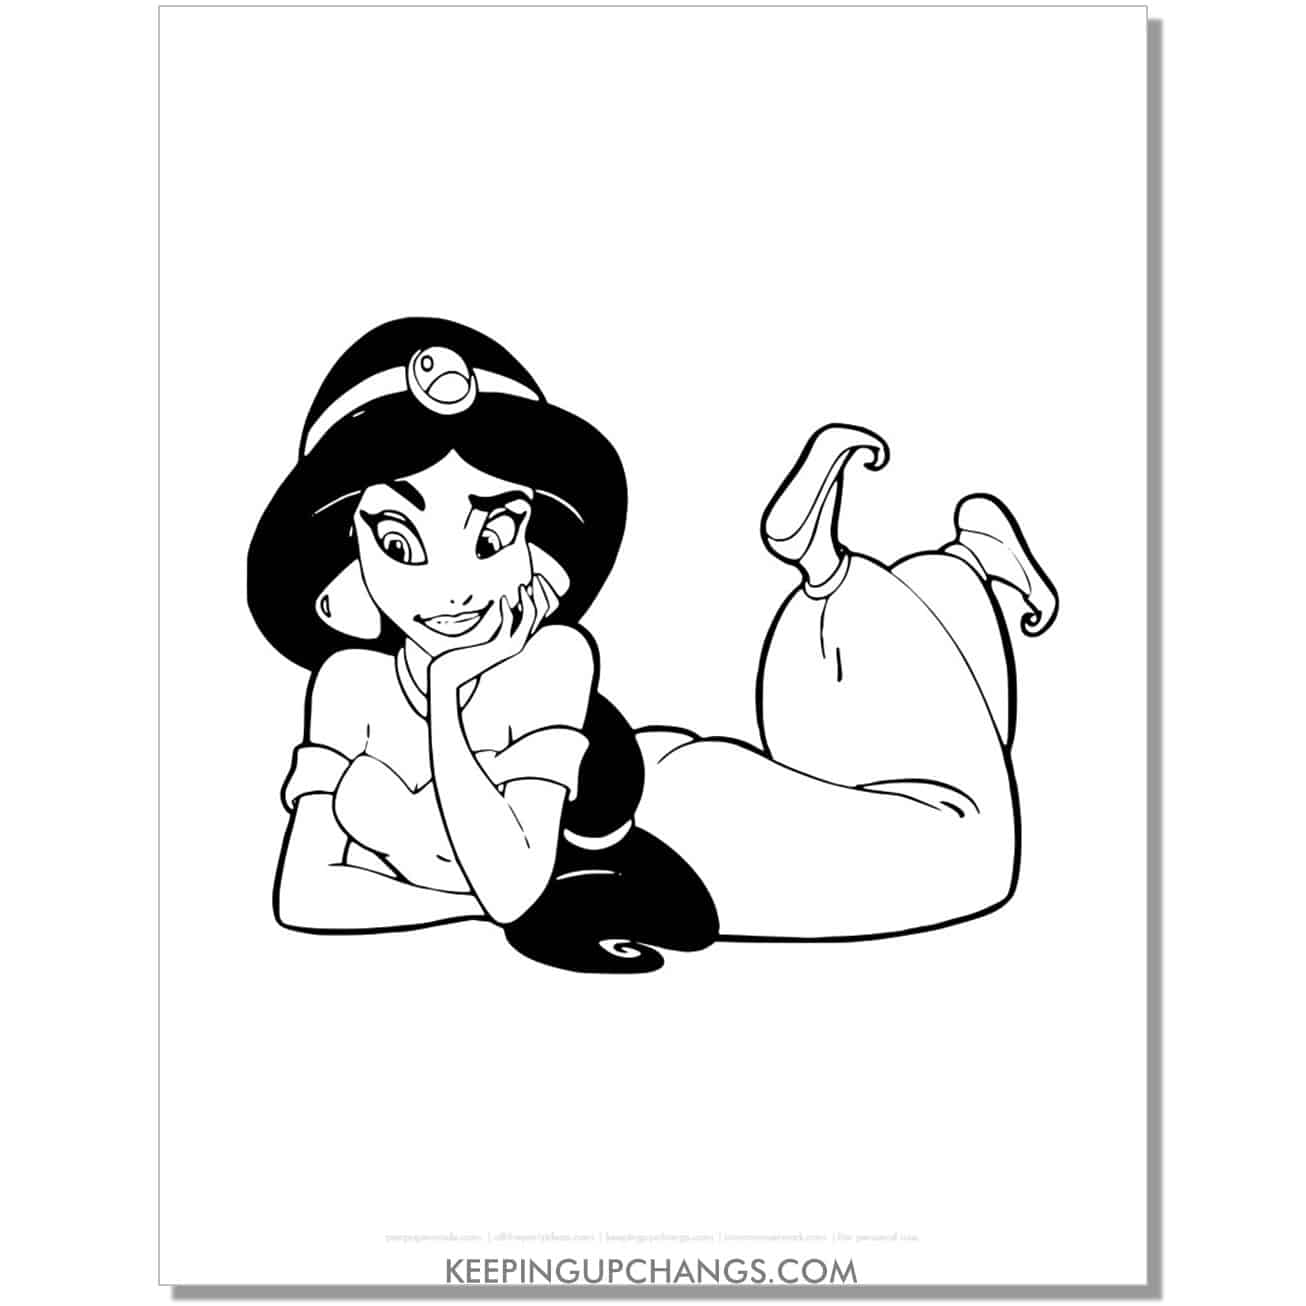 jasmine lying on stomach coloring page, sheet.